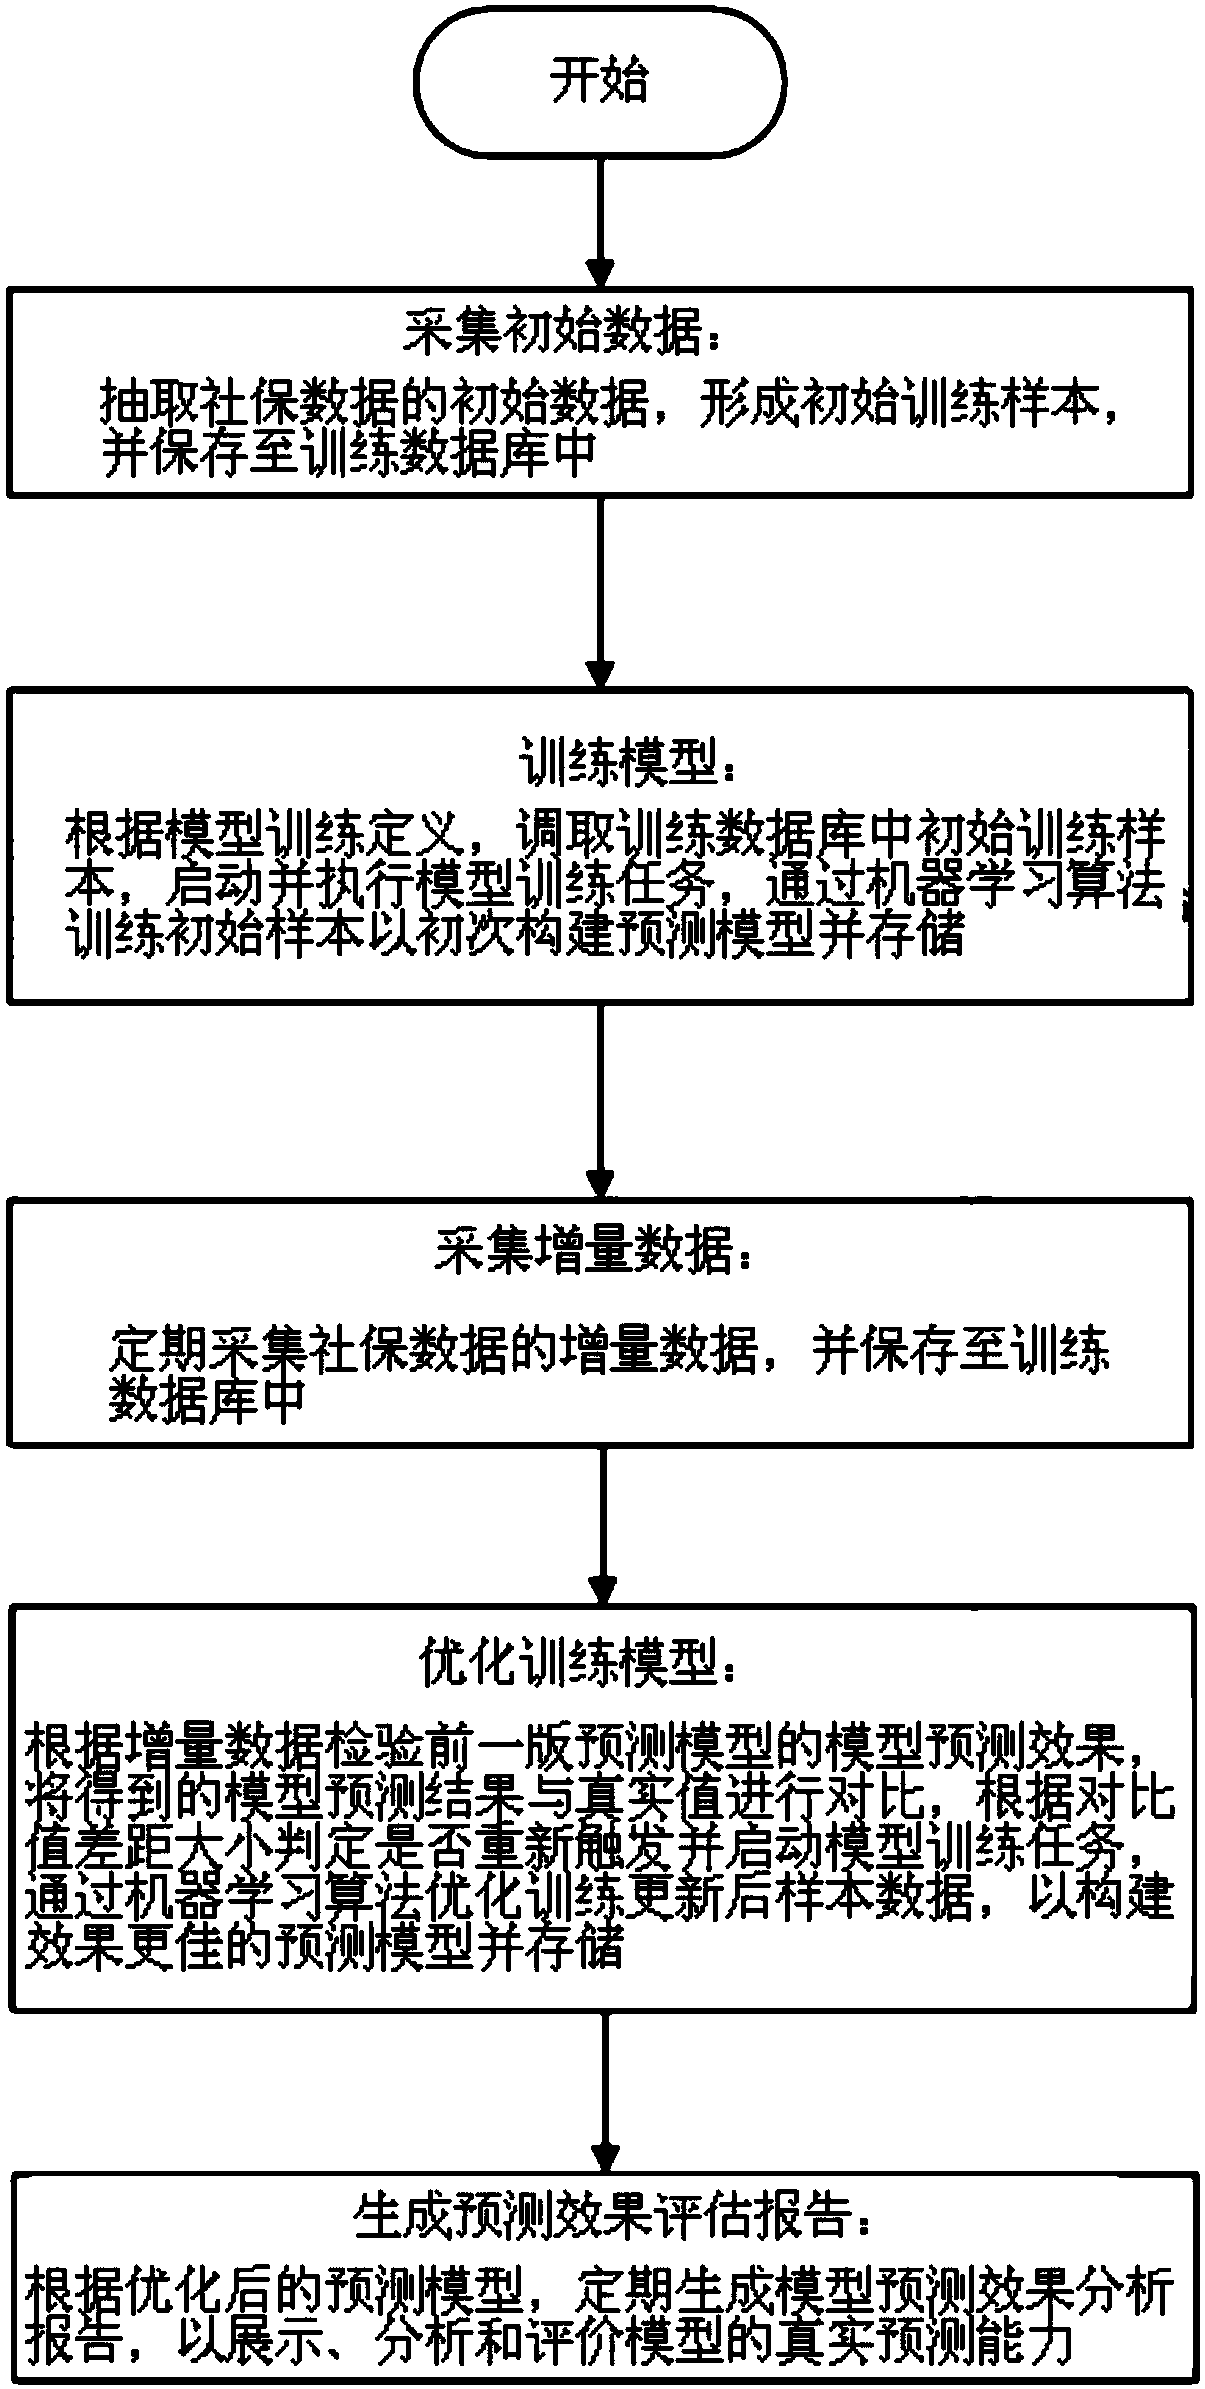 Method and system for building medical insurance hospitalization fee prediction model